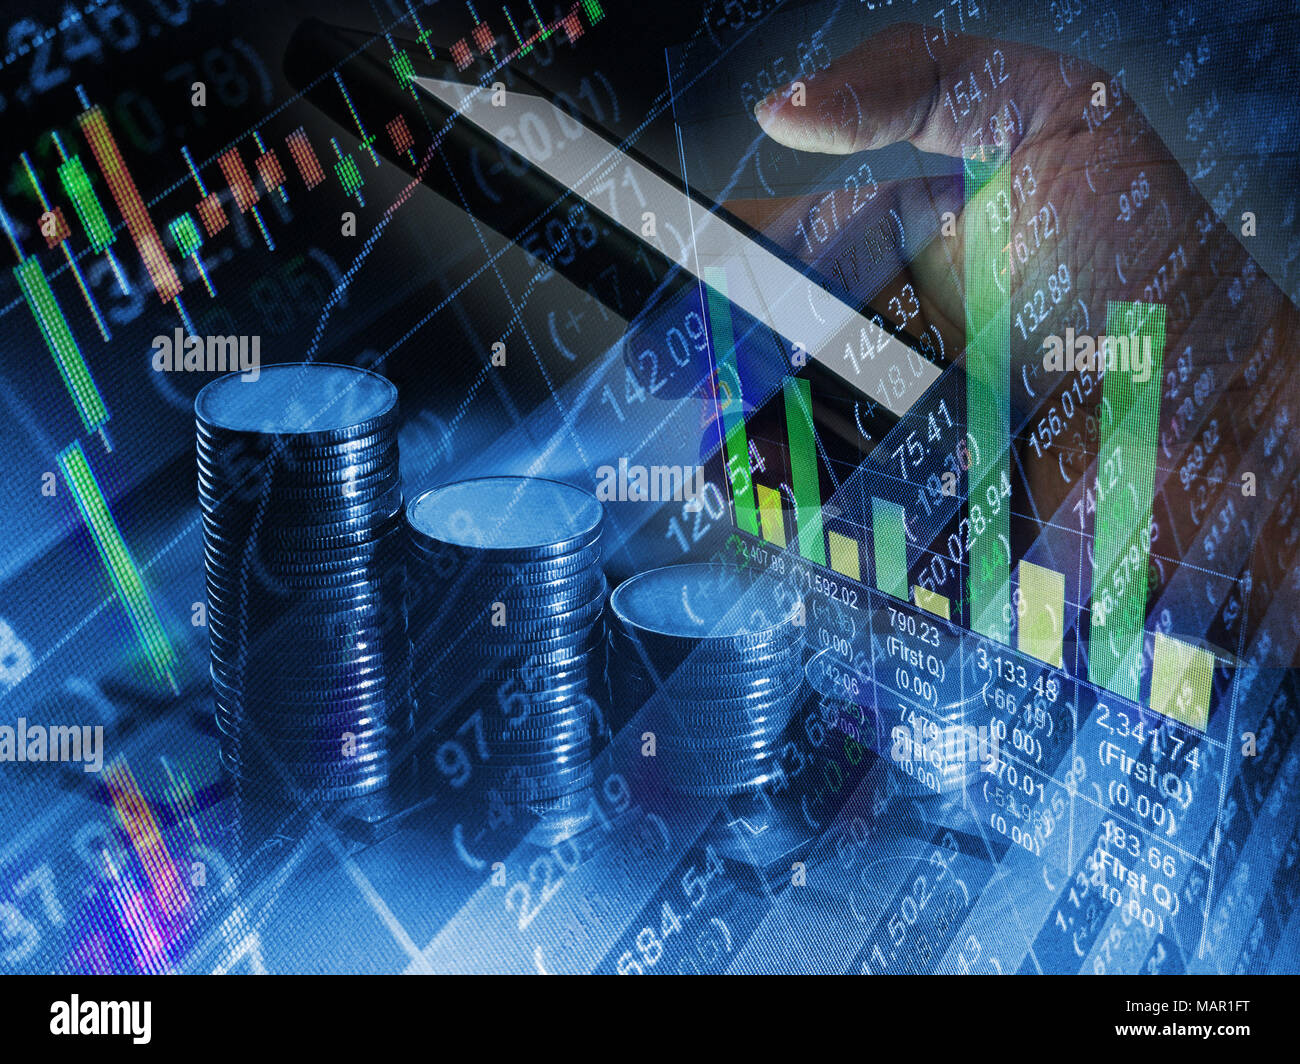 Financial stock market exchange online mobile trade, internet business concept background Stock Photo